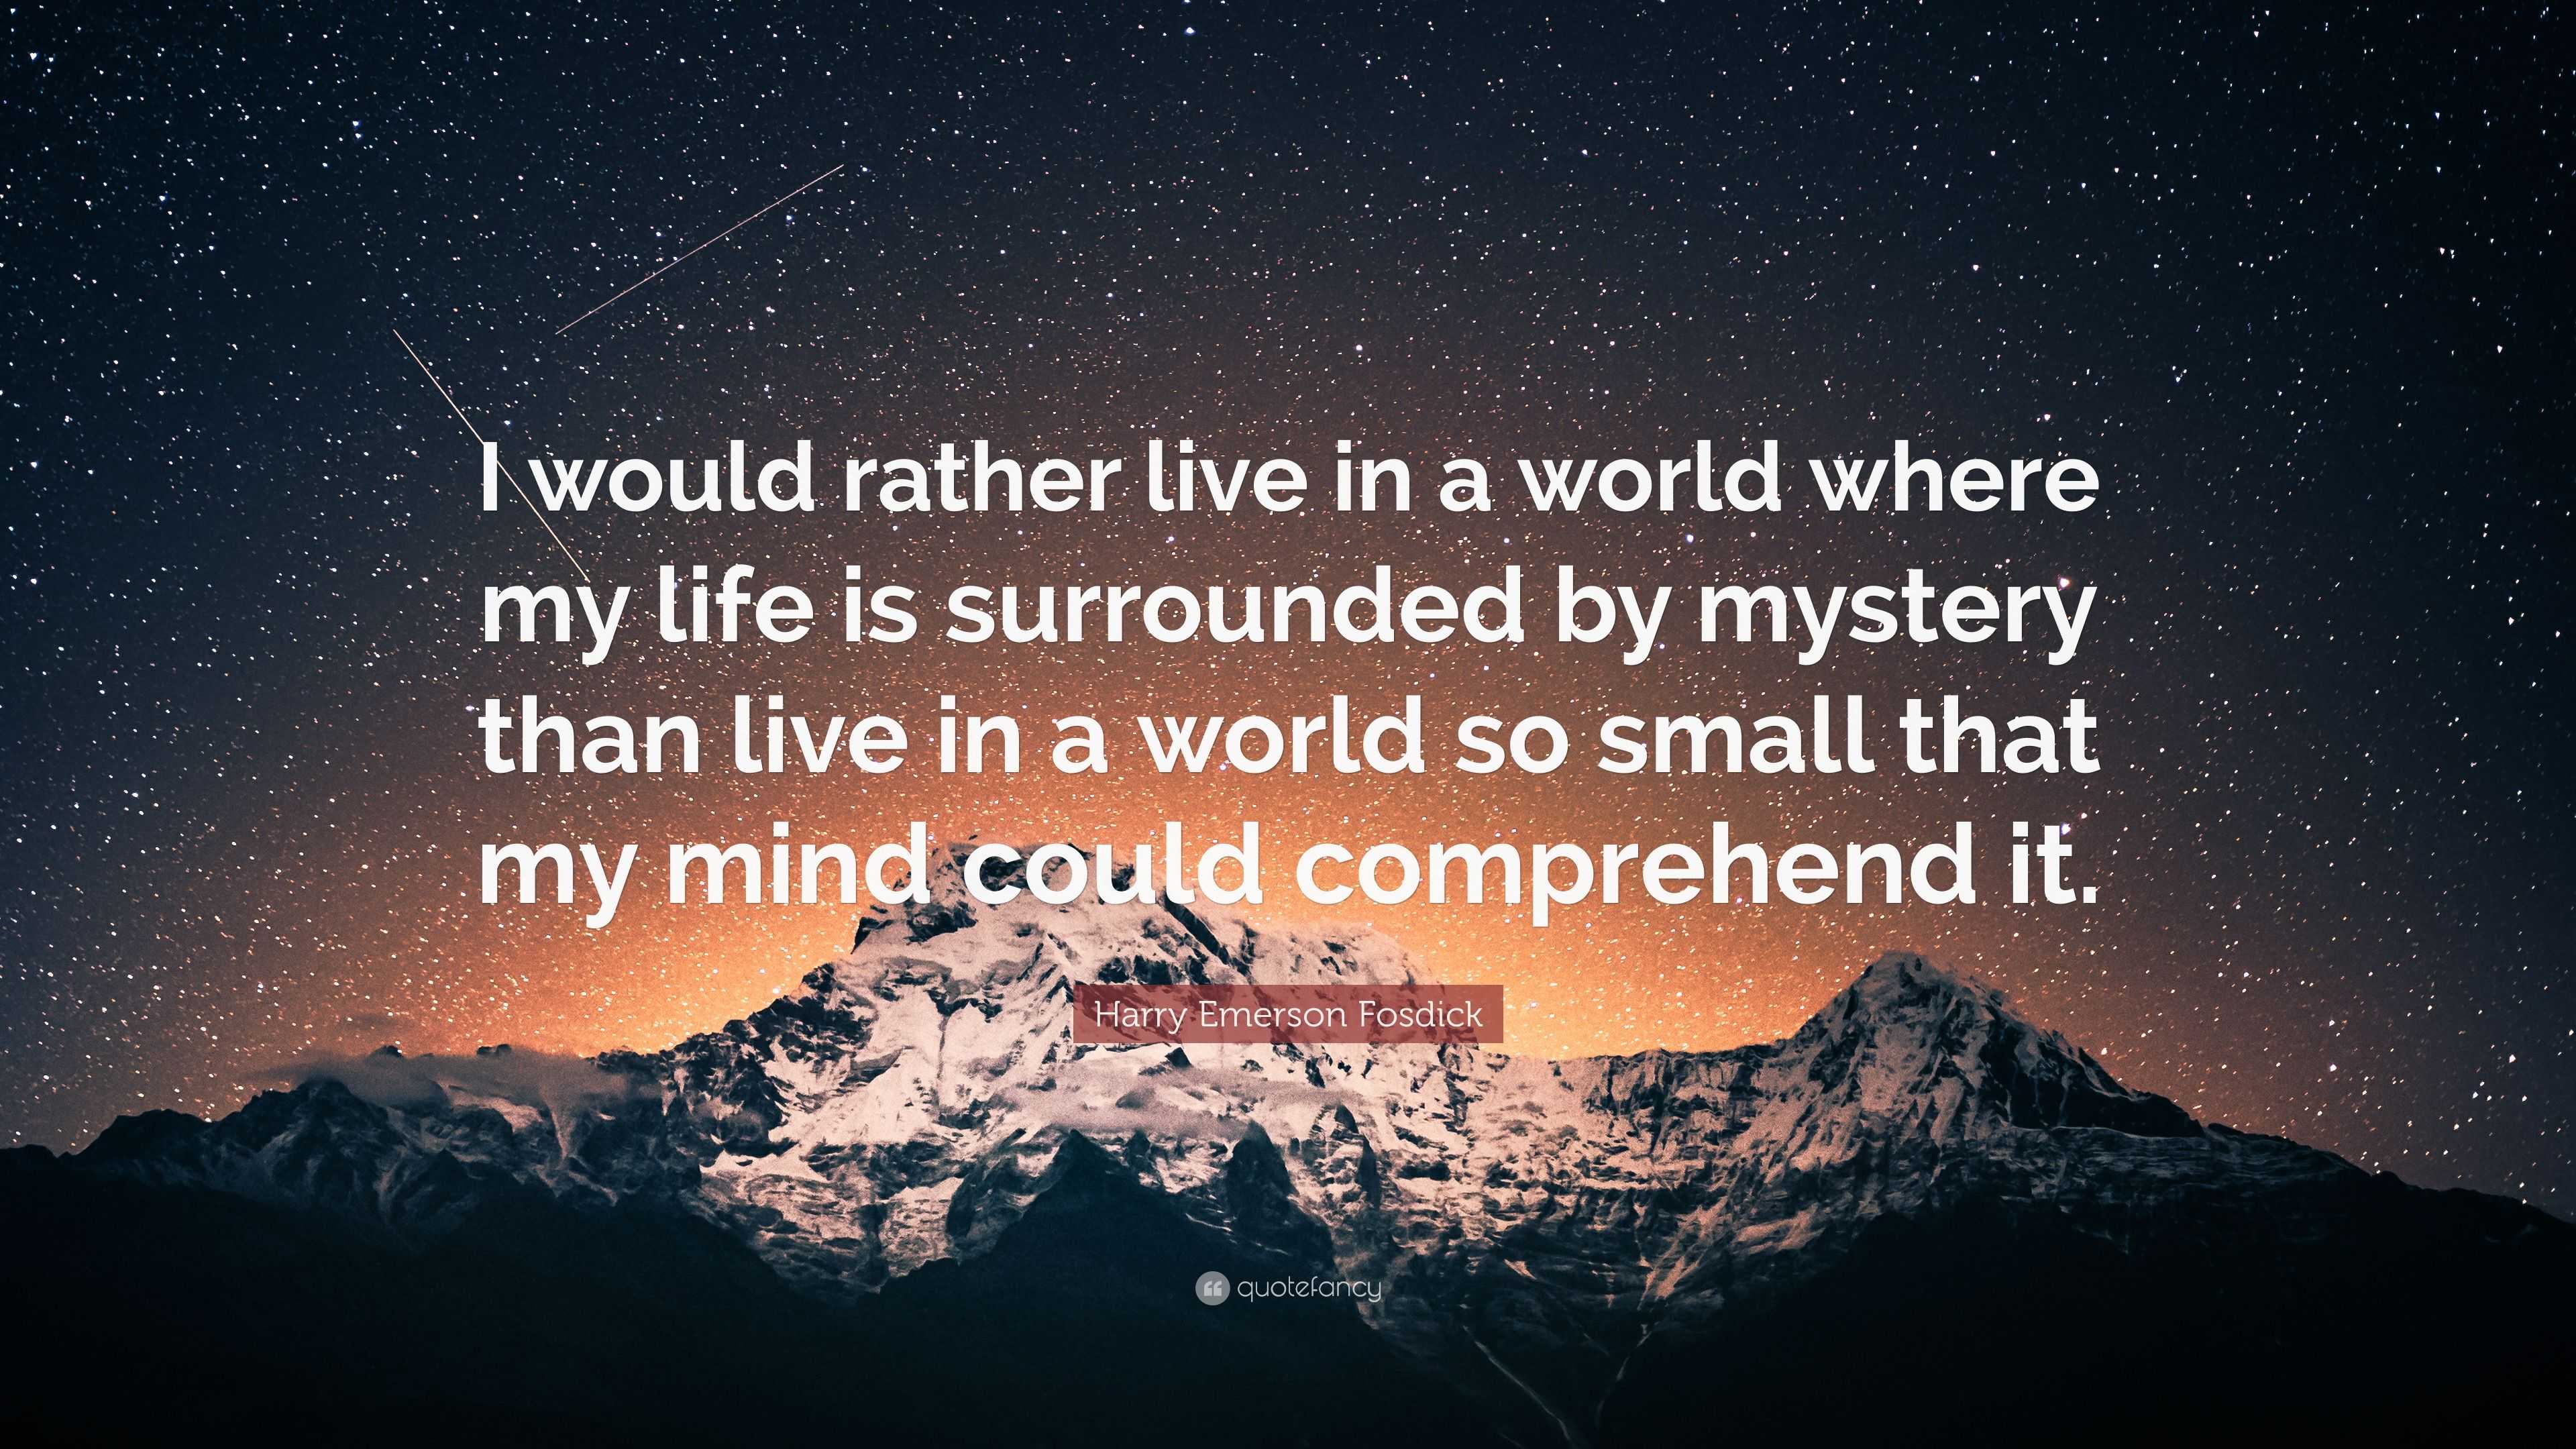 Harry Emerson Fosdick Quote: “I would rather live in a world where my